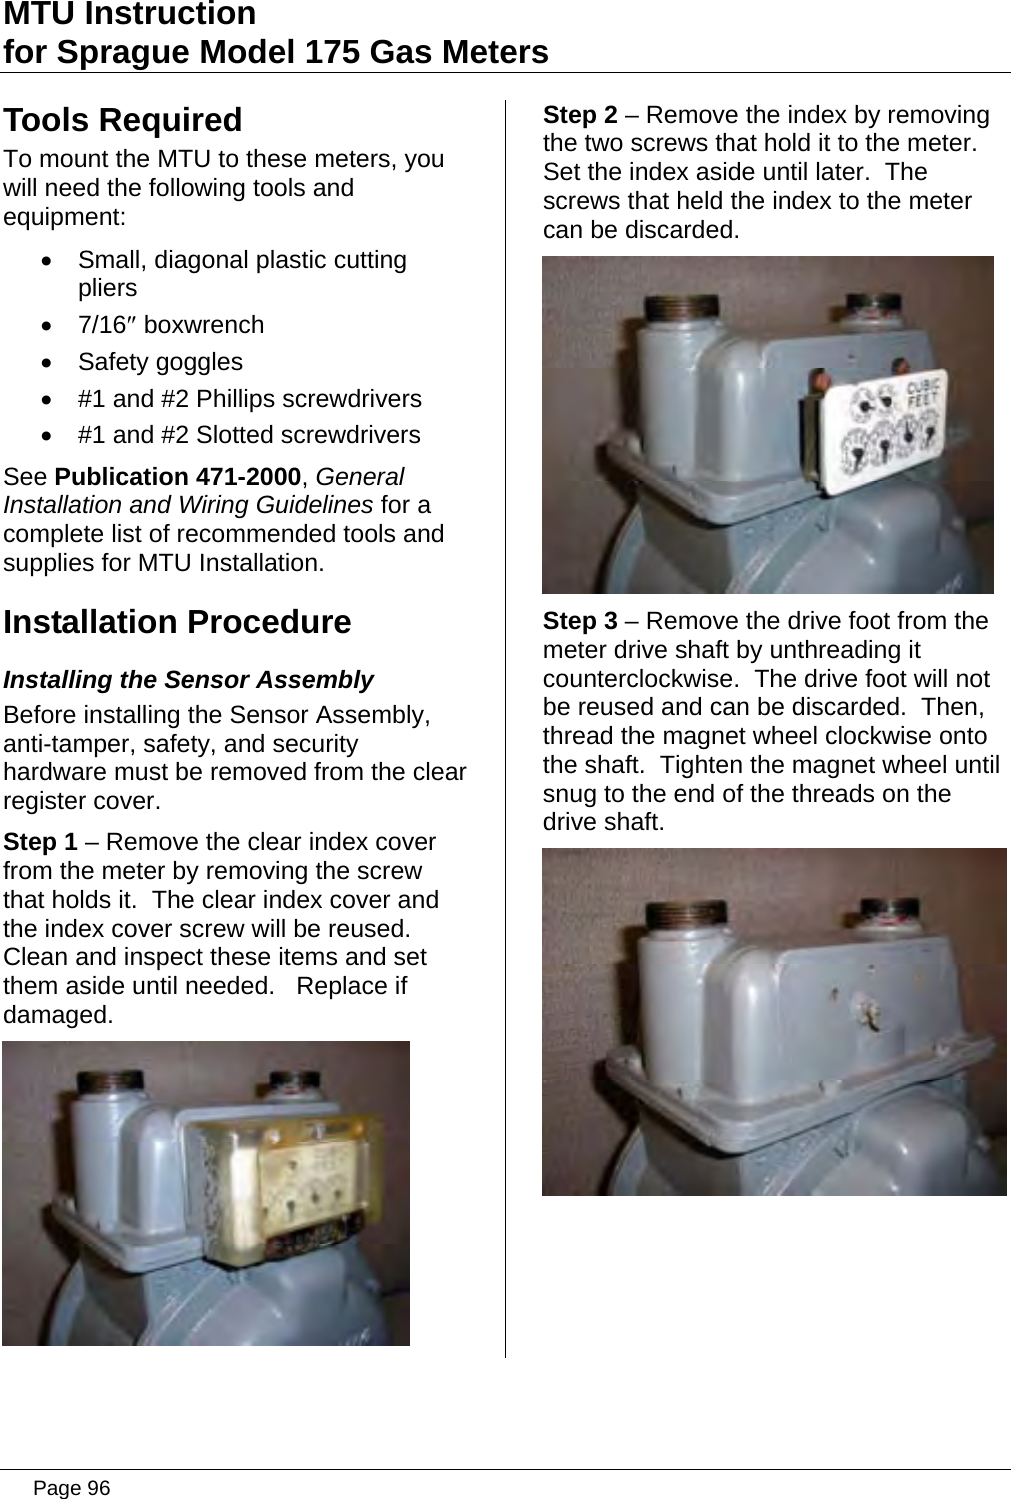 Page 96 of Aclara Technologies 09015 Transmitter for Meter Reading User Manual users manual